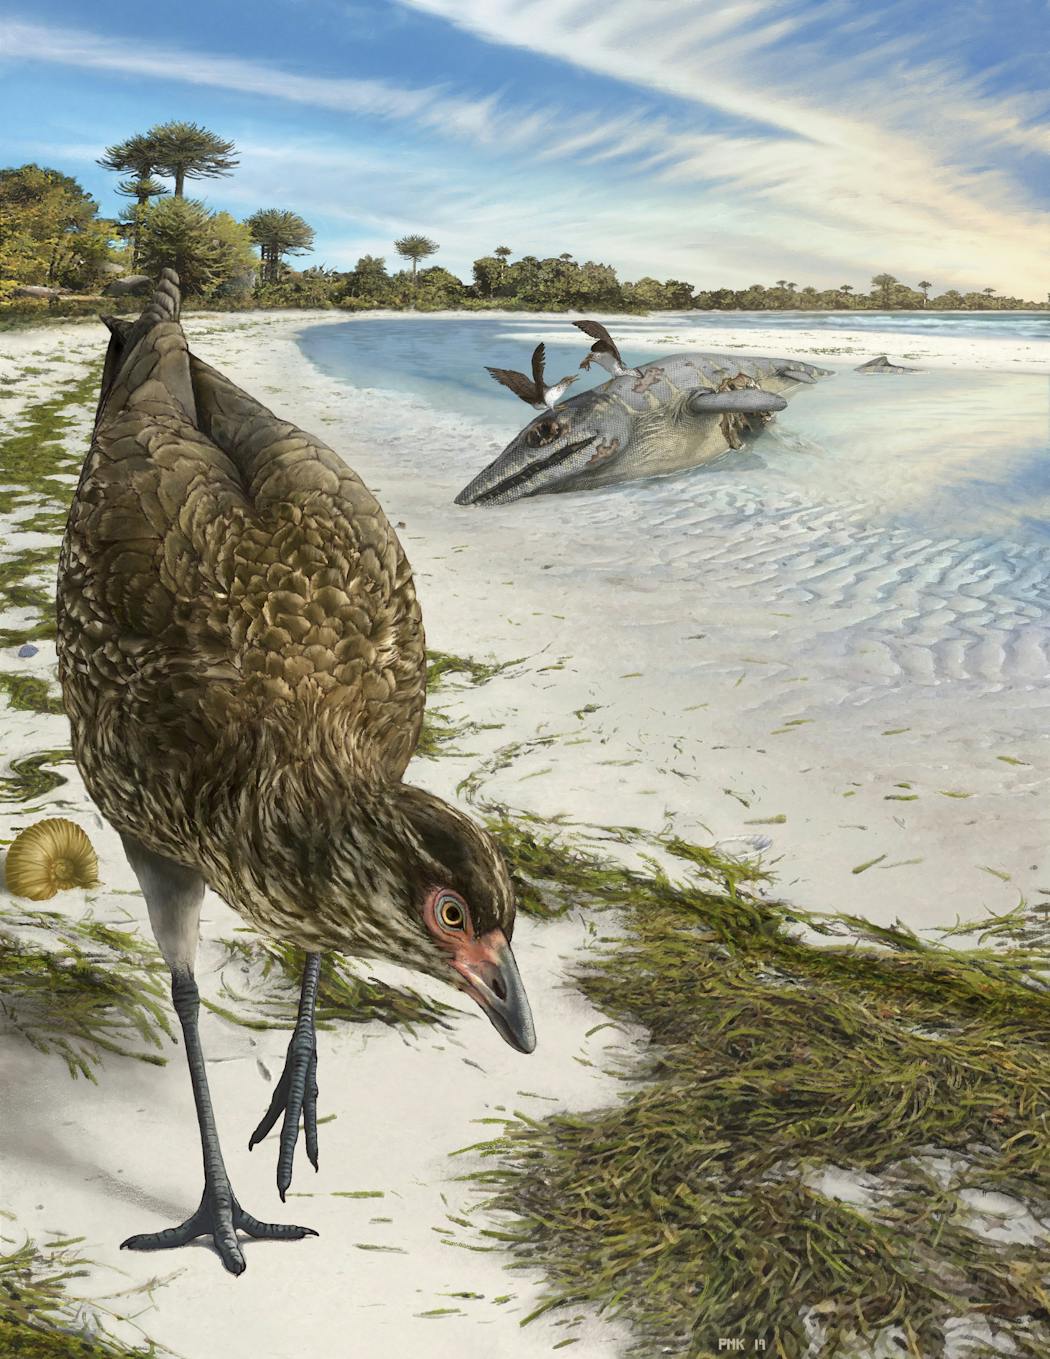 The world's oldest modern bird, Asteriornis maastrichtensis, nicknamed the Wonderchicken, in its original environment. The animal lived just before the asteroid impact that's blamed for killing off many species, most notably the giant dinosaurs.